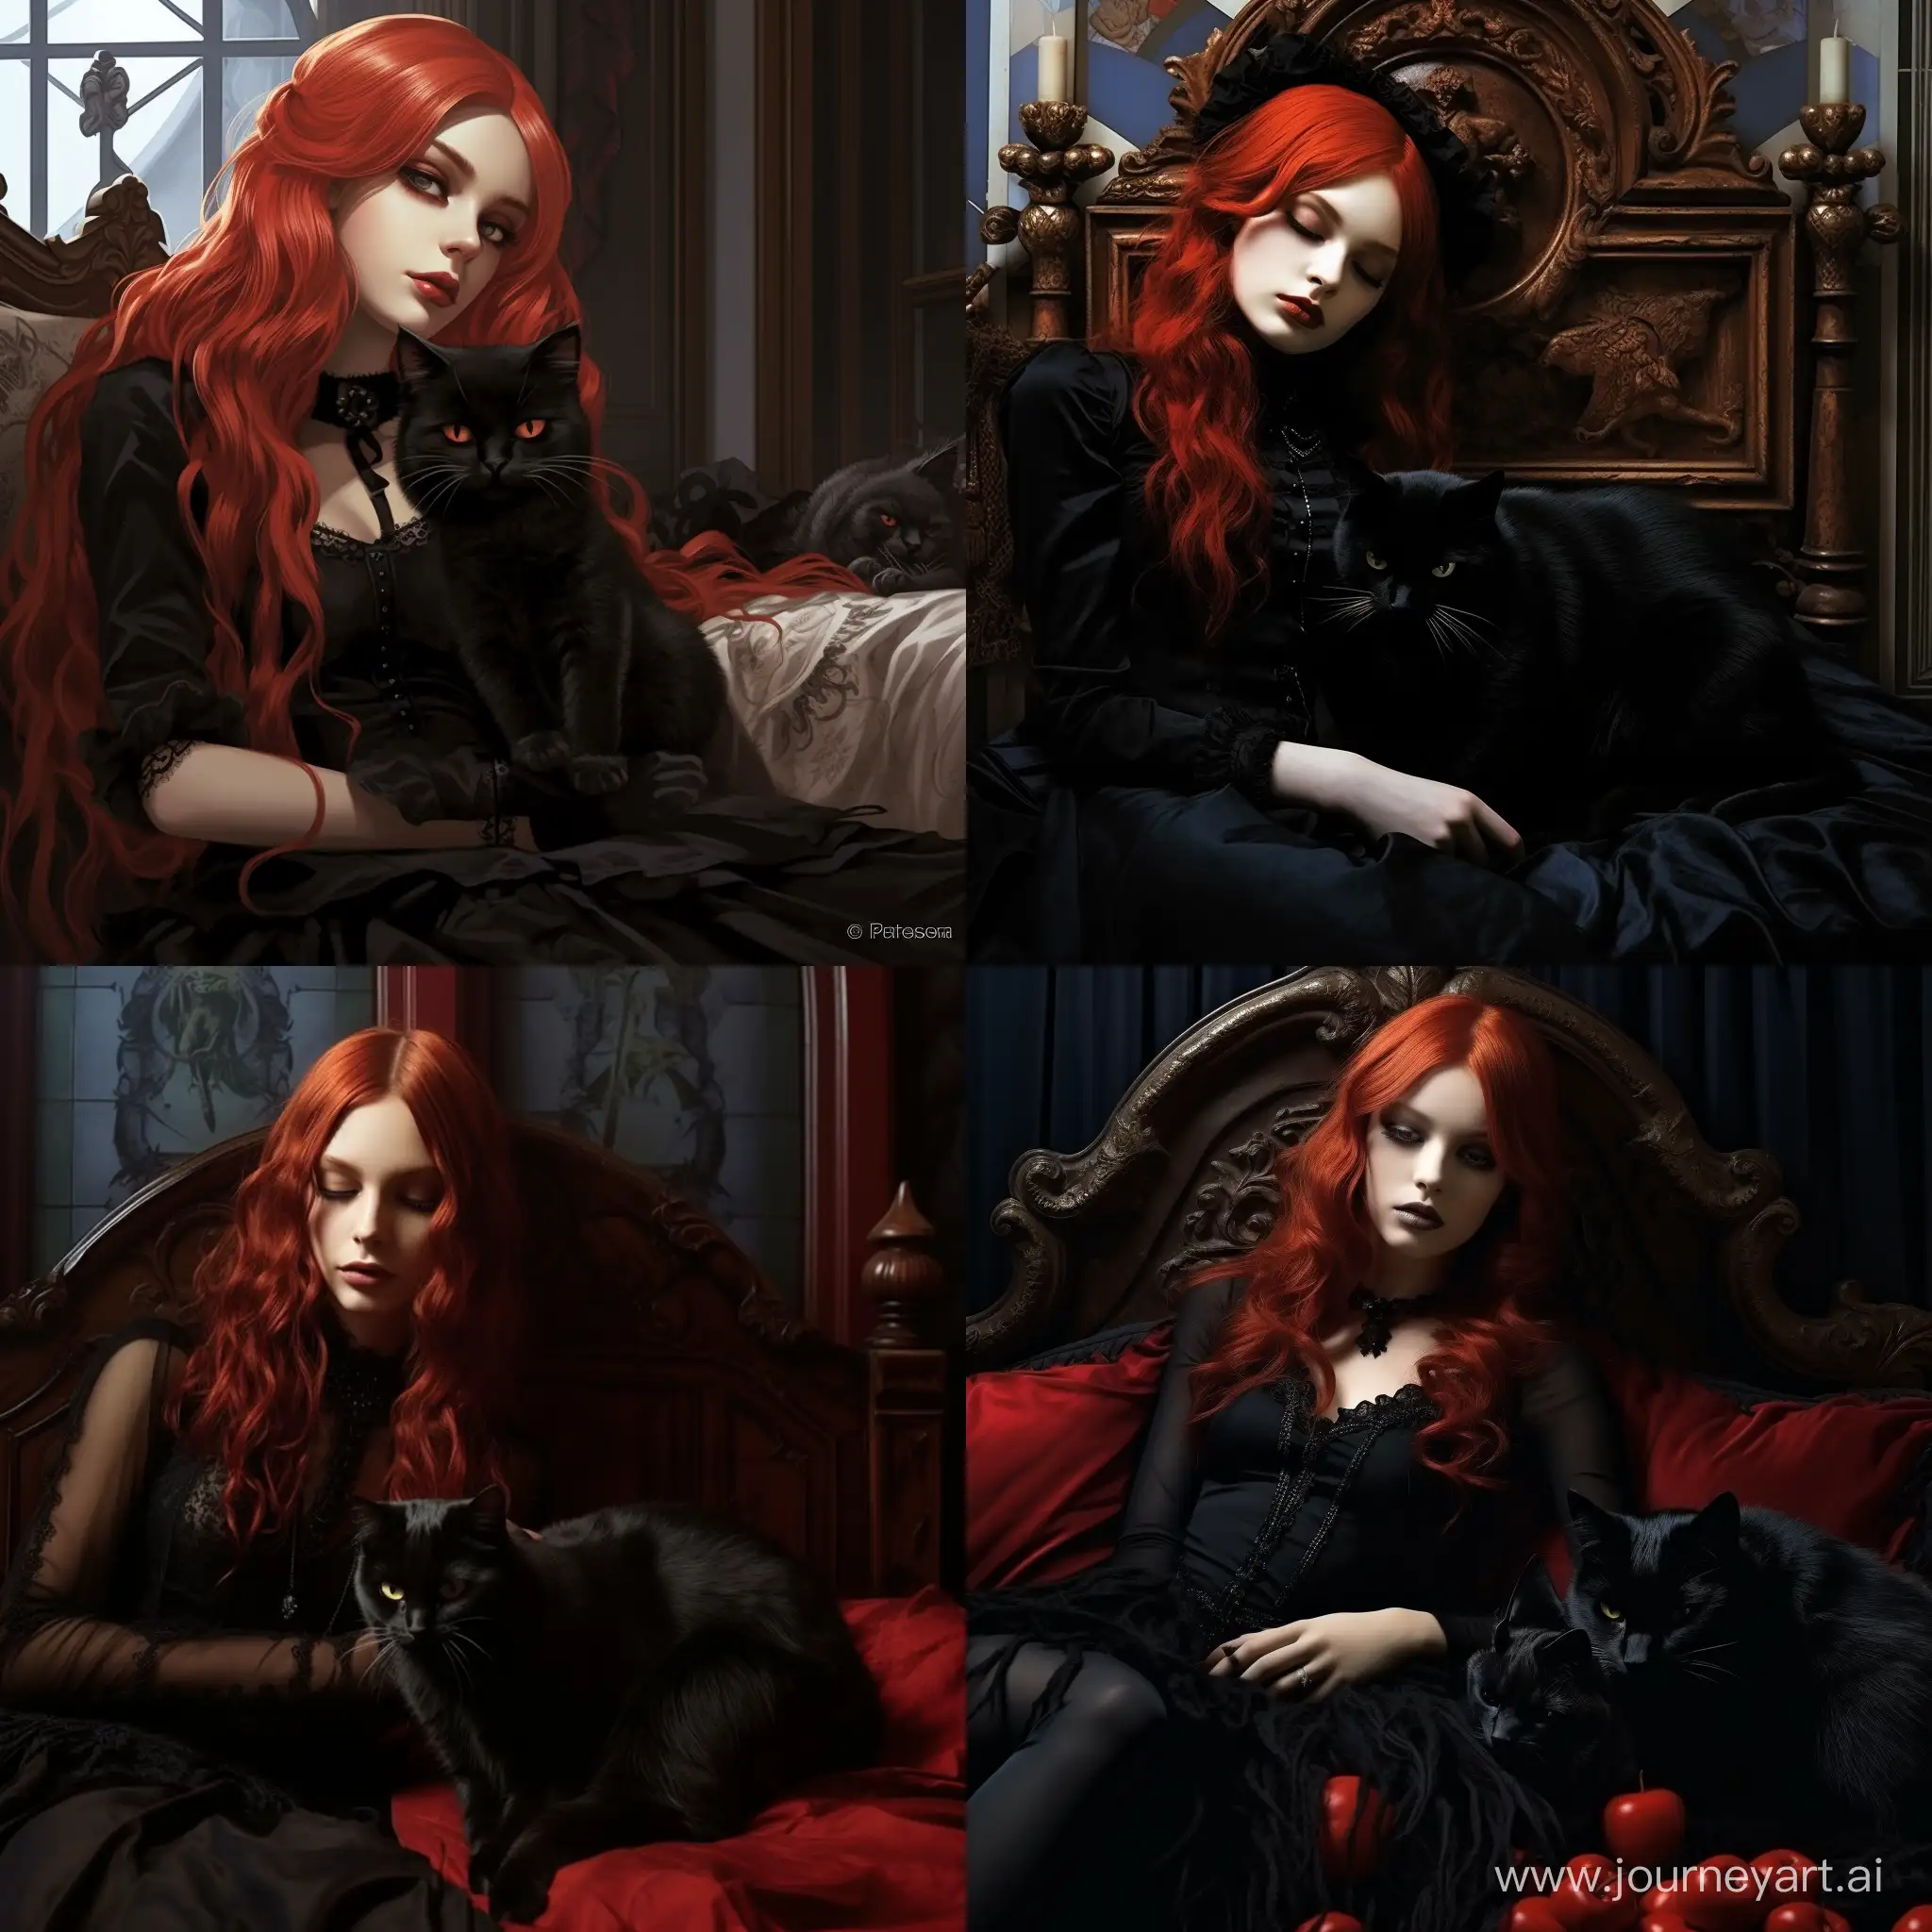 RedHaired-Gothic-Girl-Sleeping-Next-to-Cat-on-GothicStyle-Bed